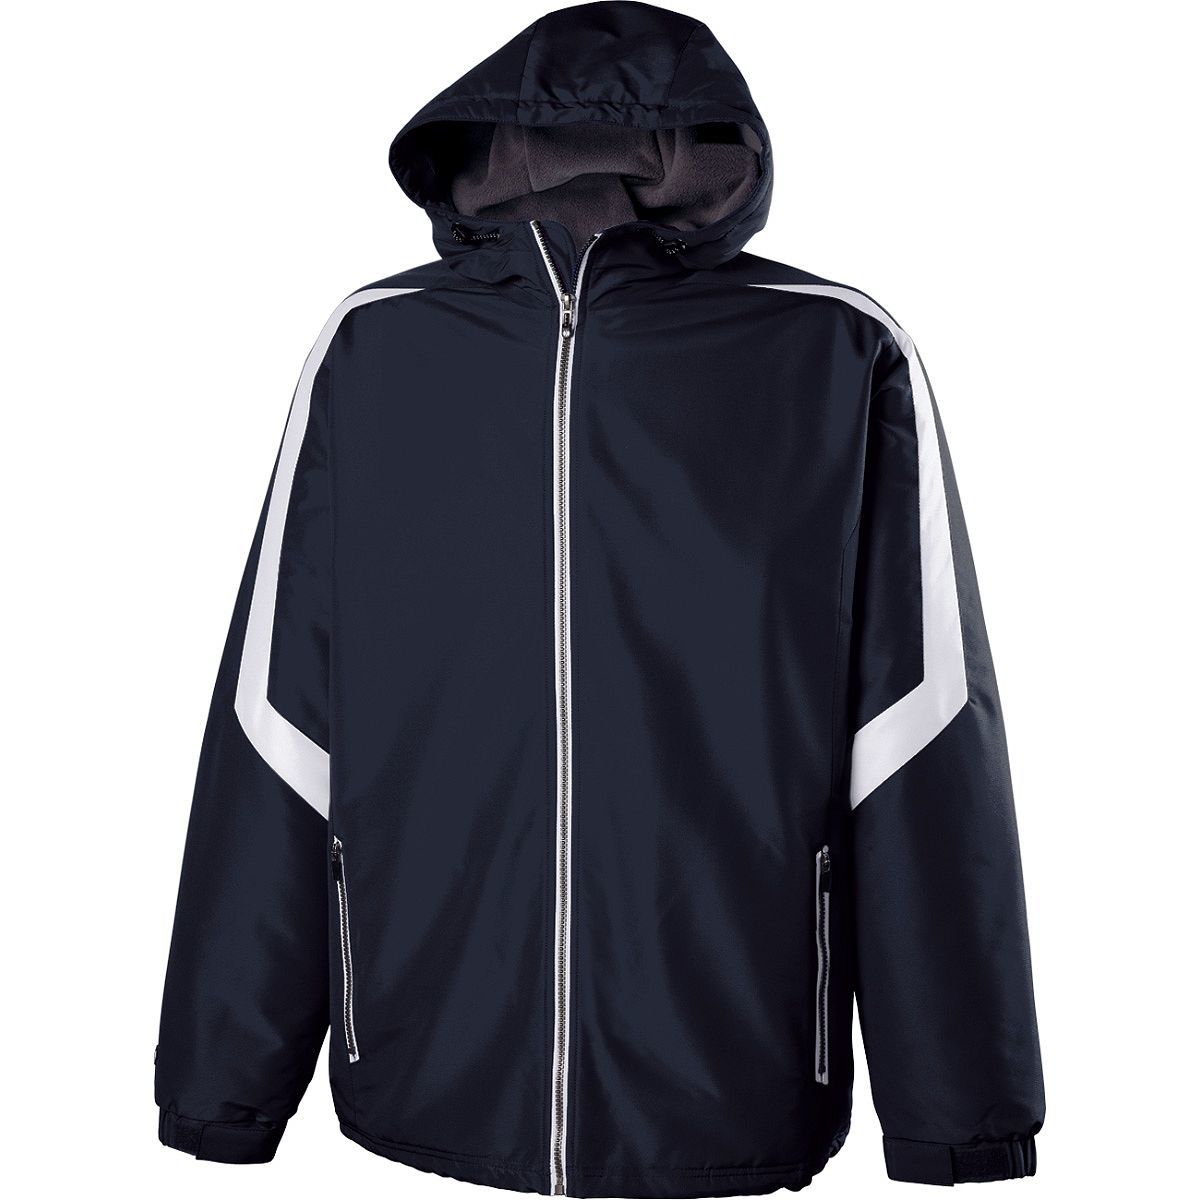 Holloway Sportswear S Charger Jacket Navy/White 229059 - image 1 of 4